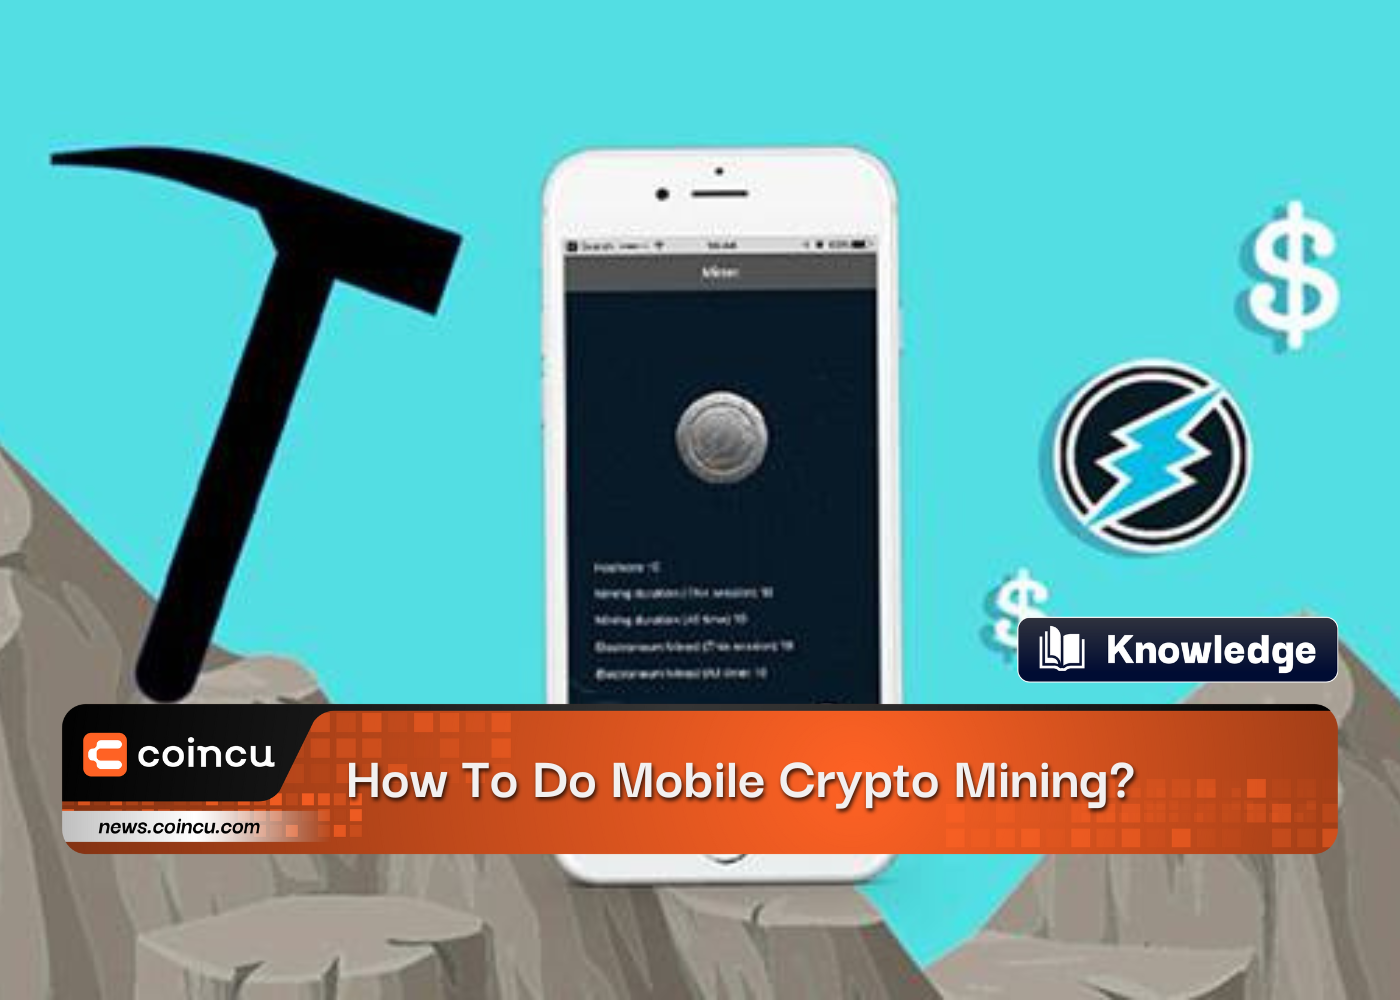 How To Do Mobile Crypto Mining